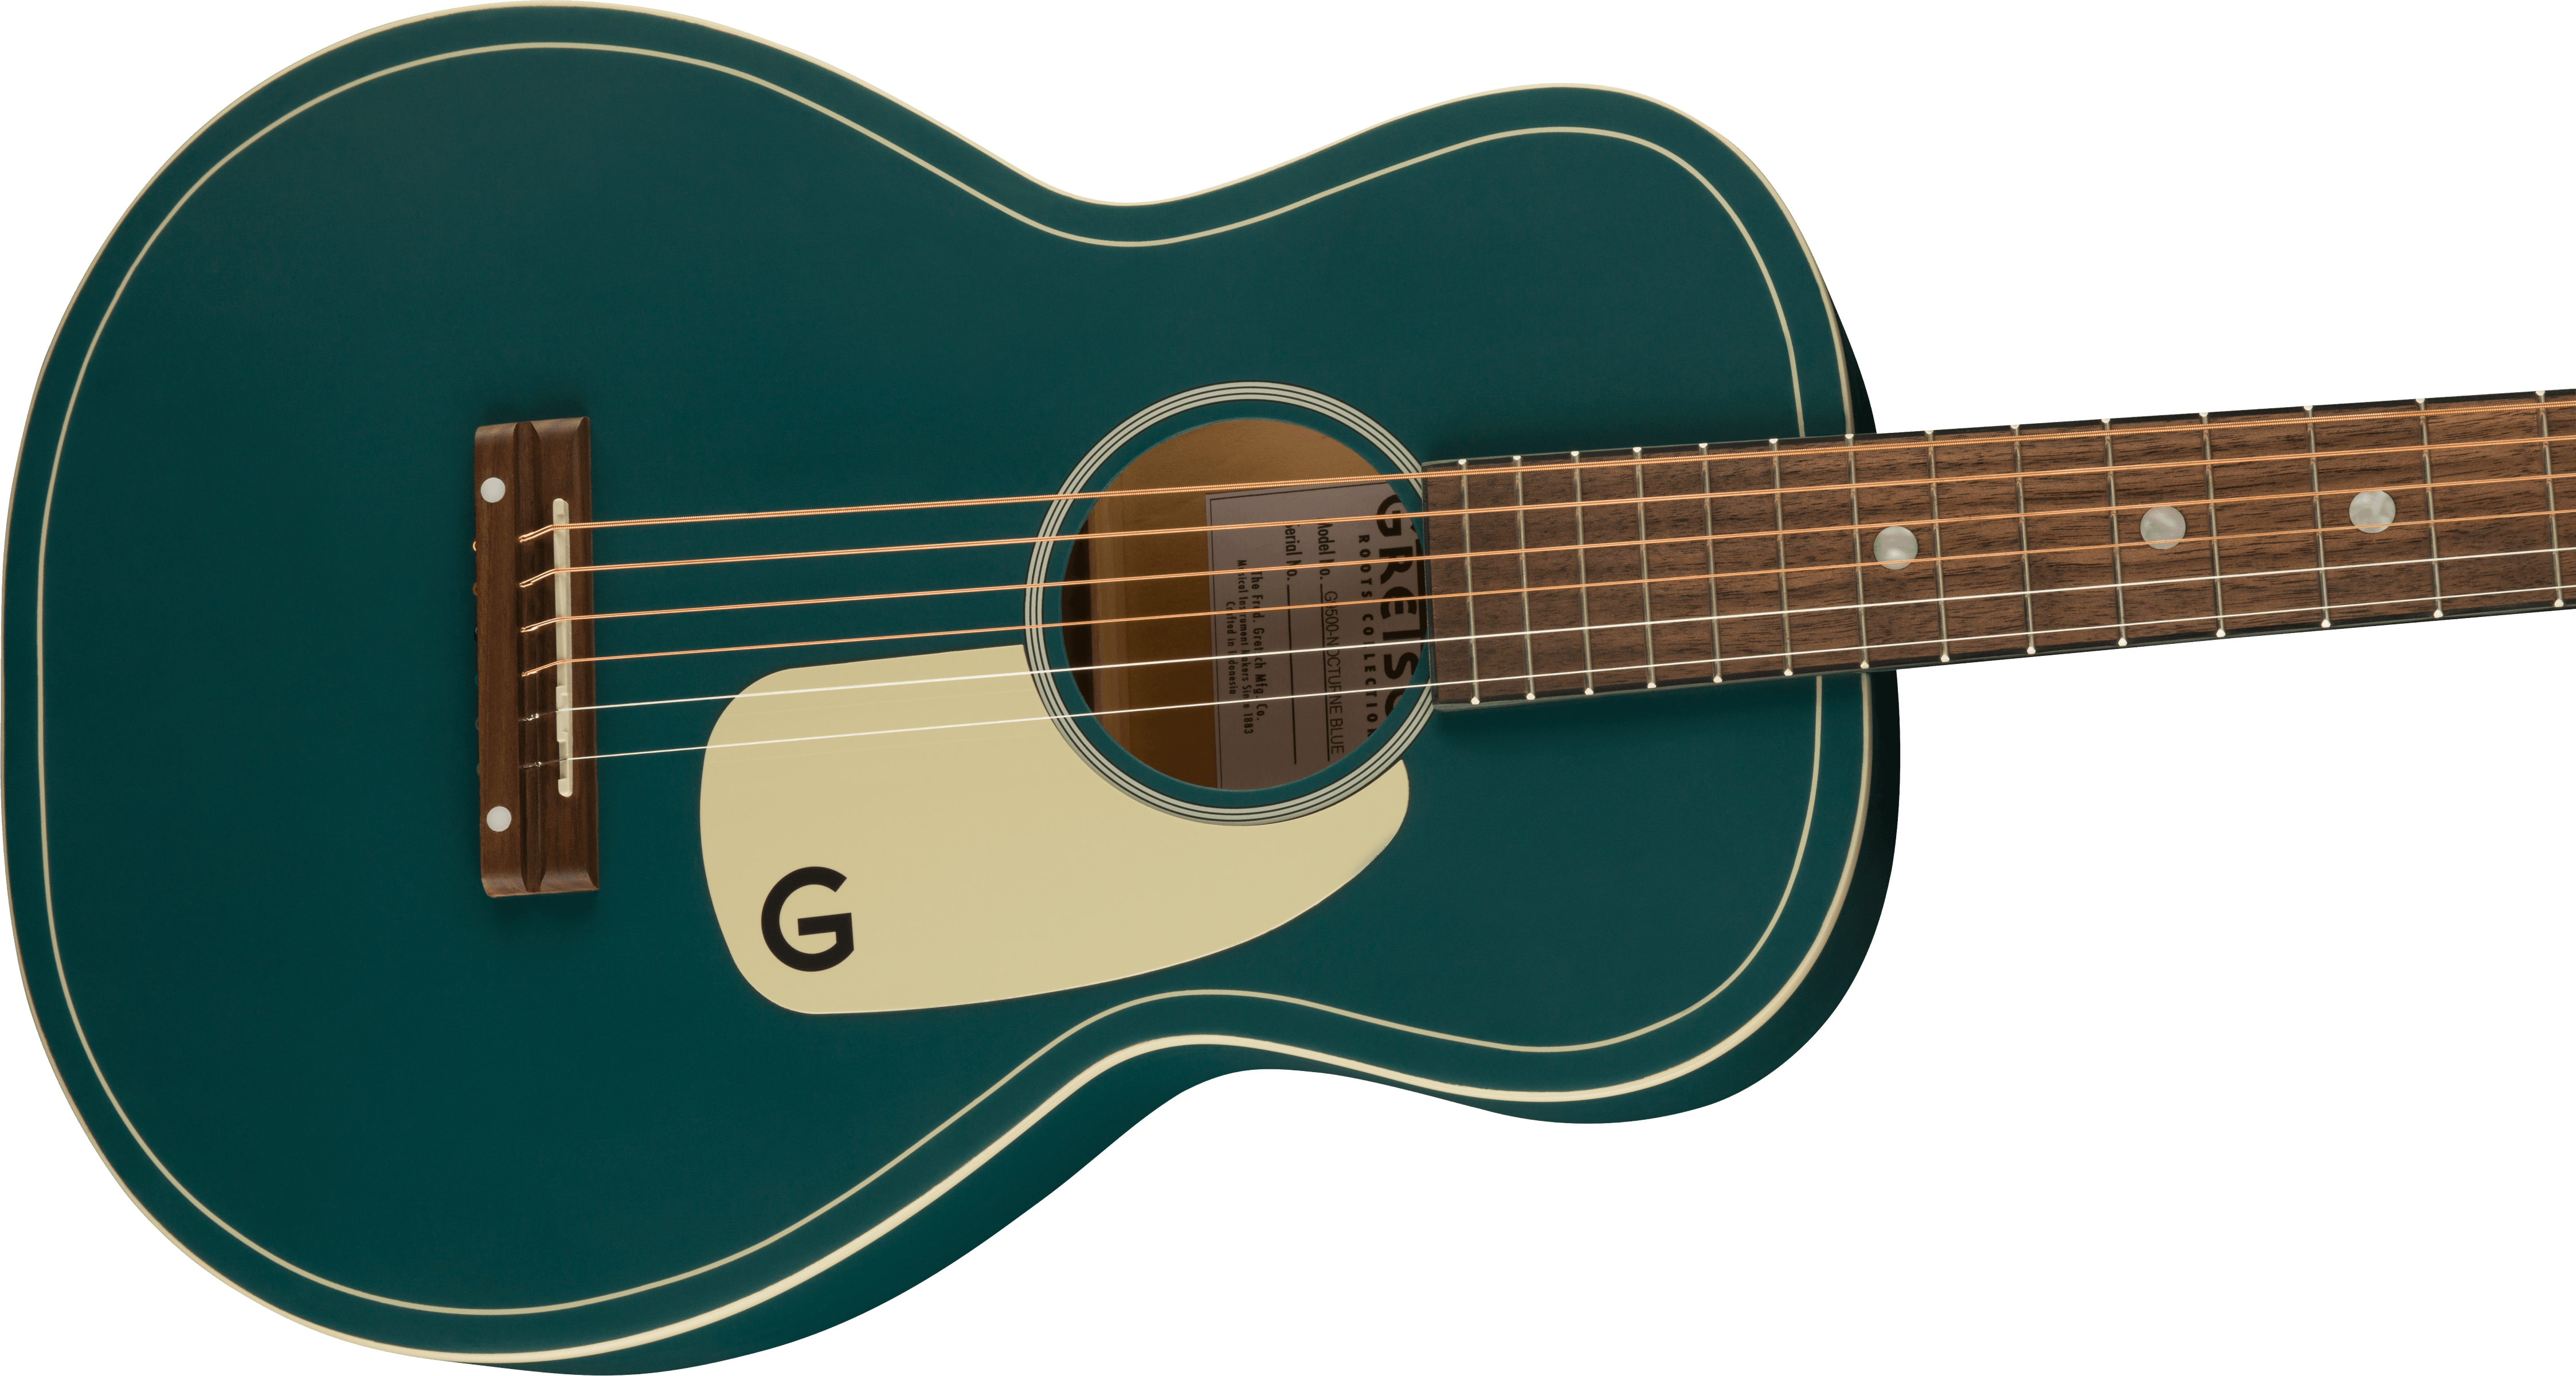 Gretsch G9500 Jim Dandy Limited Edition Acoustic Guitar in Nocturne Blue